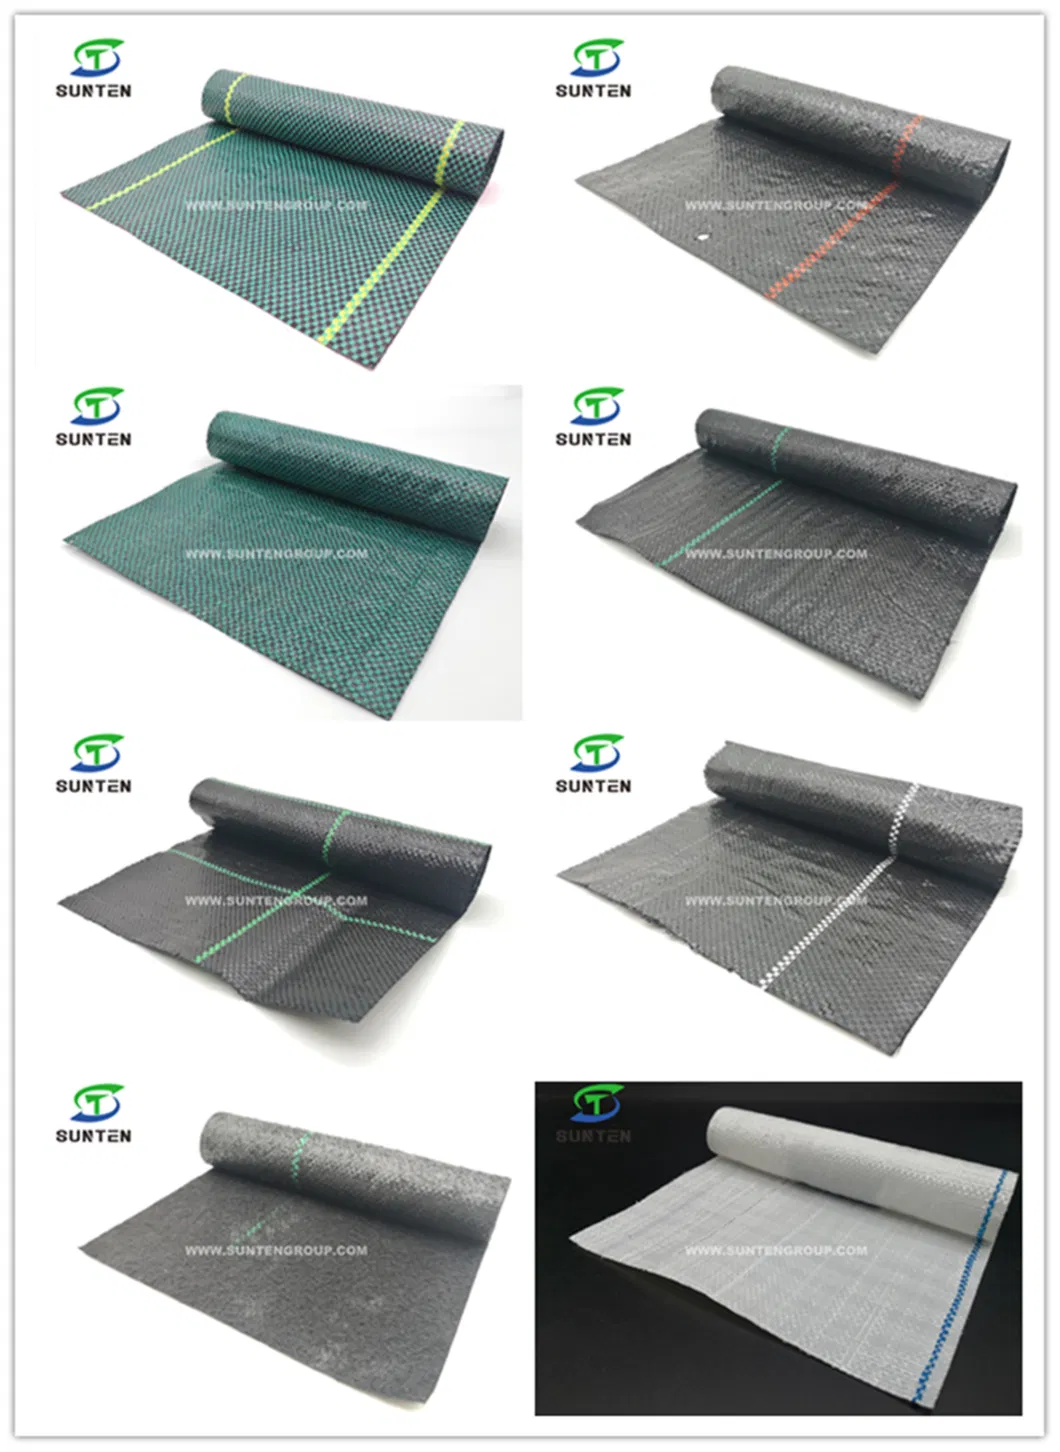 EU Standard Anti UV Black/Green/White PP/PE/Plastic Woven Weed Control Geotextile/Anti Grass/Fabric for Agriculture/Garden/Landscape